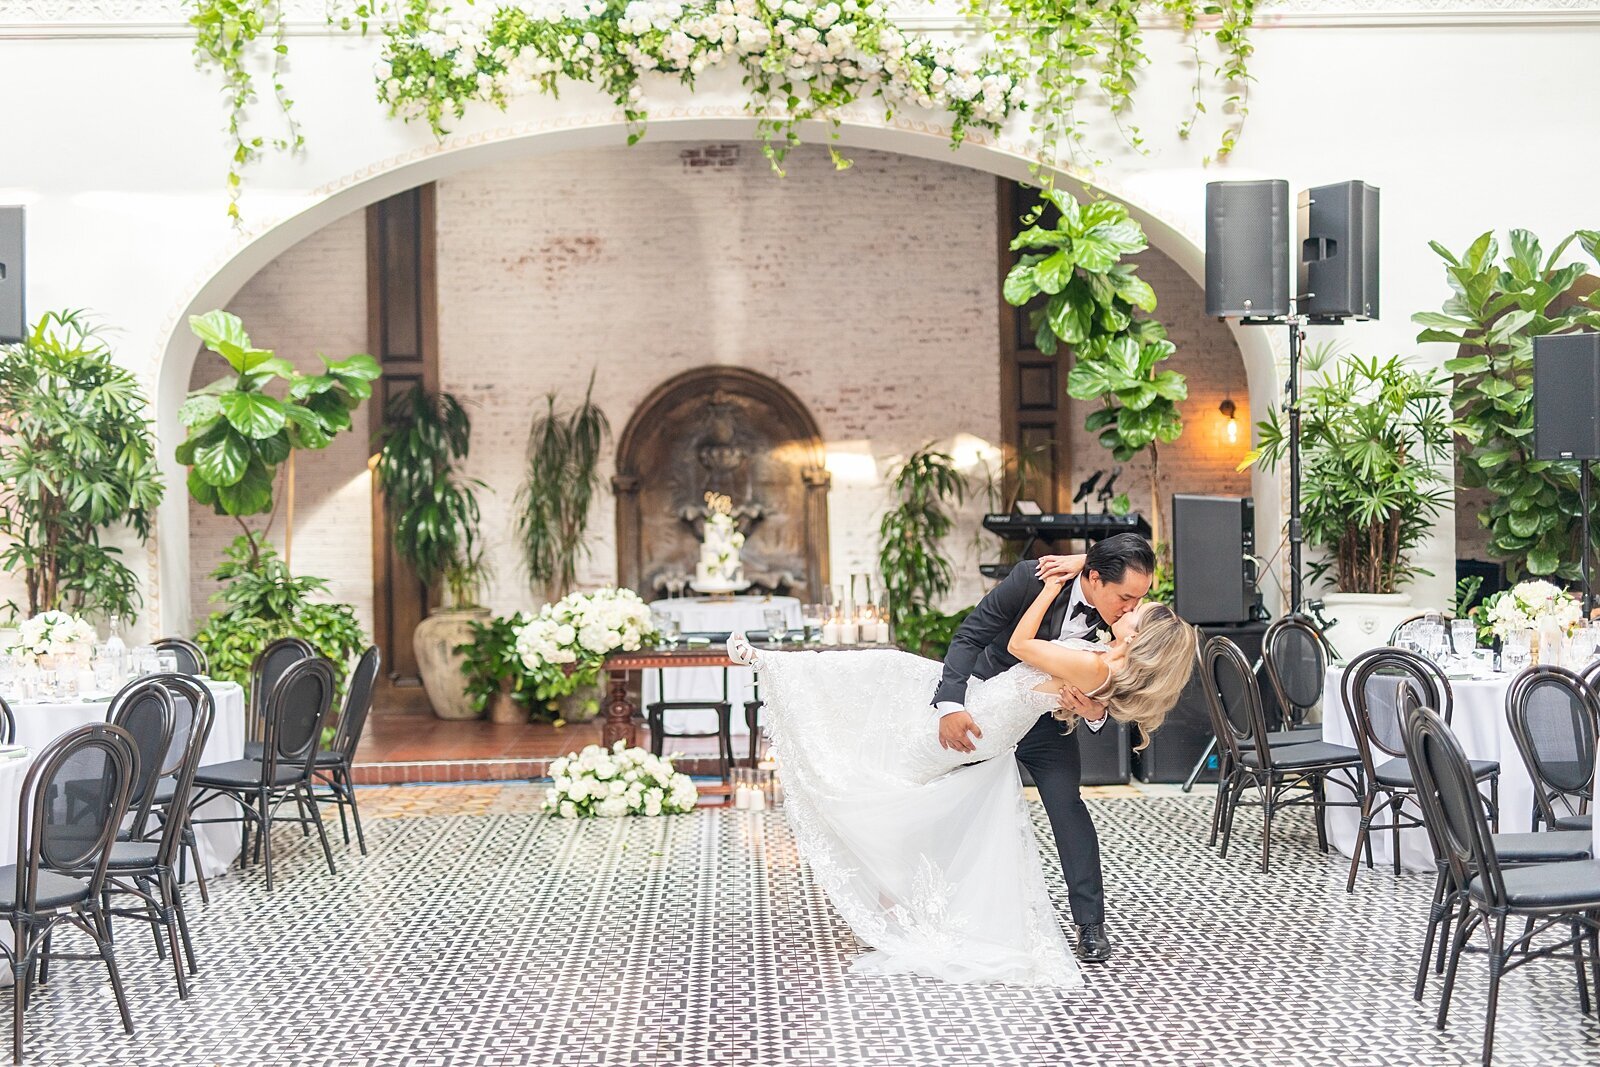 Groom dipping bride after first dance at the Ebell of Long Beach wedding venue.